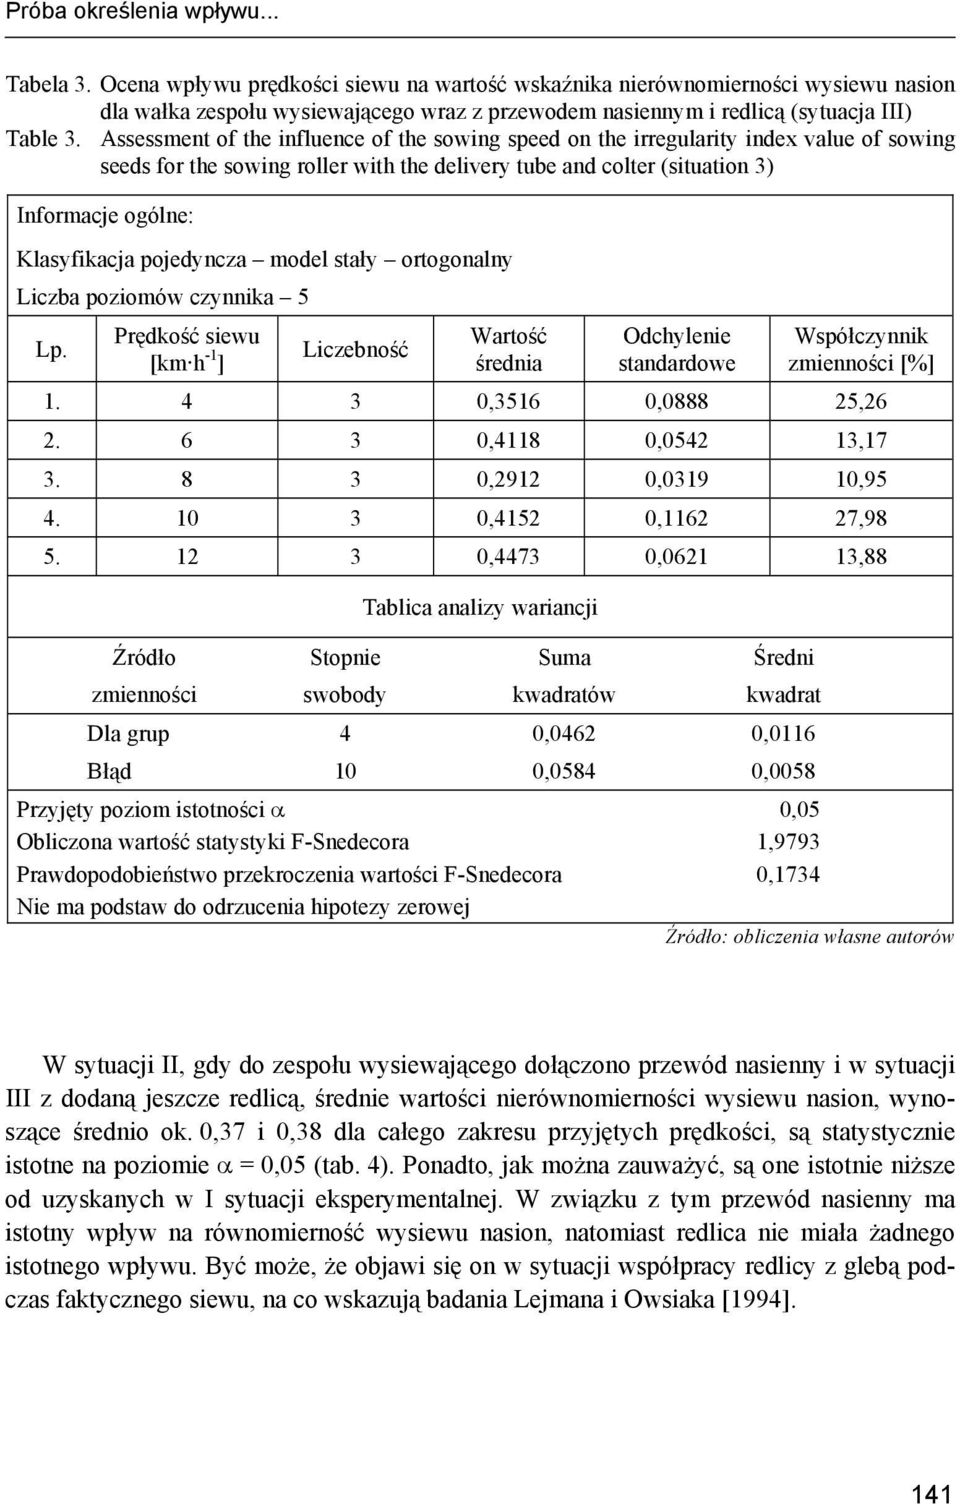 Assessment of the influence of the sowing speed on the irregularity index value of sowing seeds for the sowing roller with the delivery tube and colter (situation 3) Liczba poziomów czynnika 5 Lp.